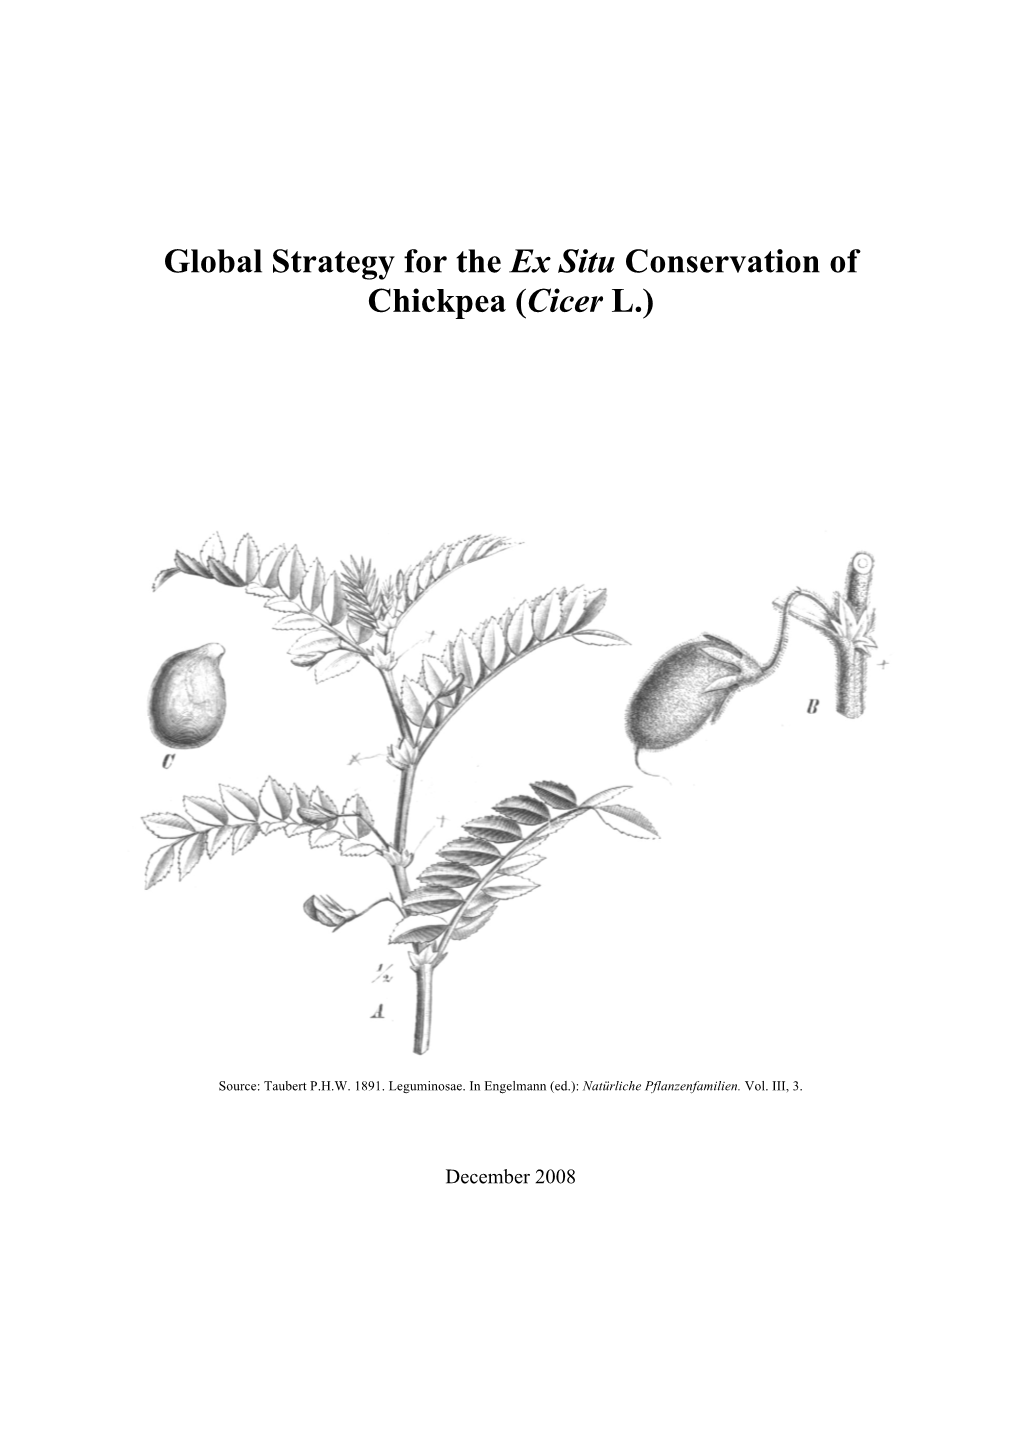 Global Strategy for the Ex Situ Conservation of Chickpea (Cicer L.)